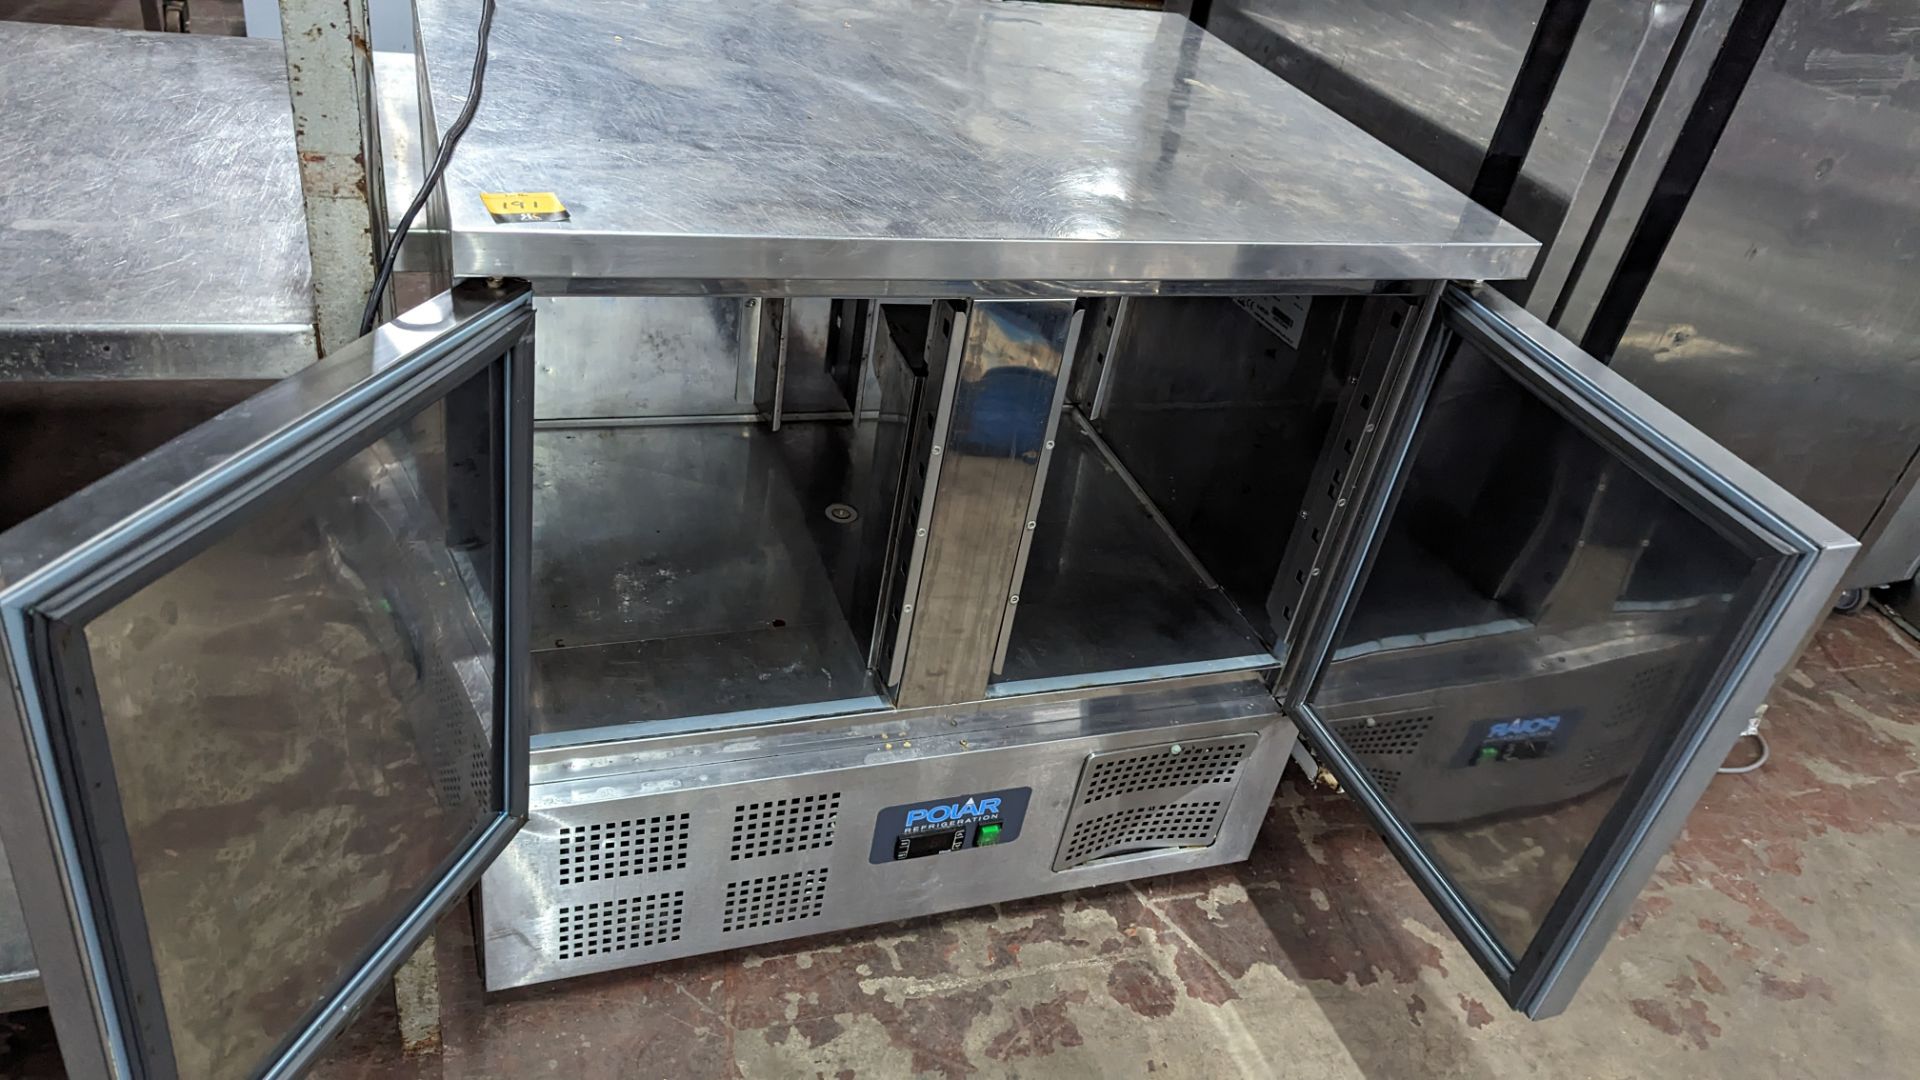 Polar Refrigeration stainless steel twin door refrigerated prep unit - Image 4 of 7